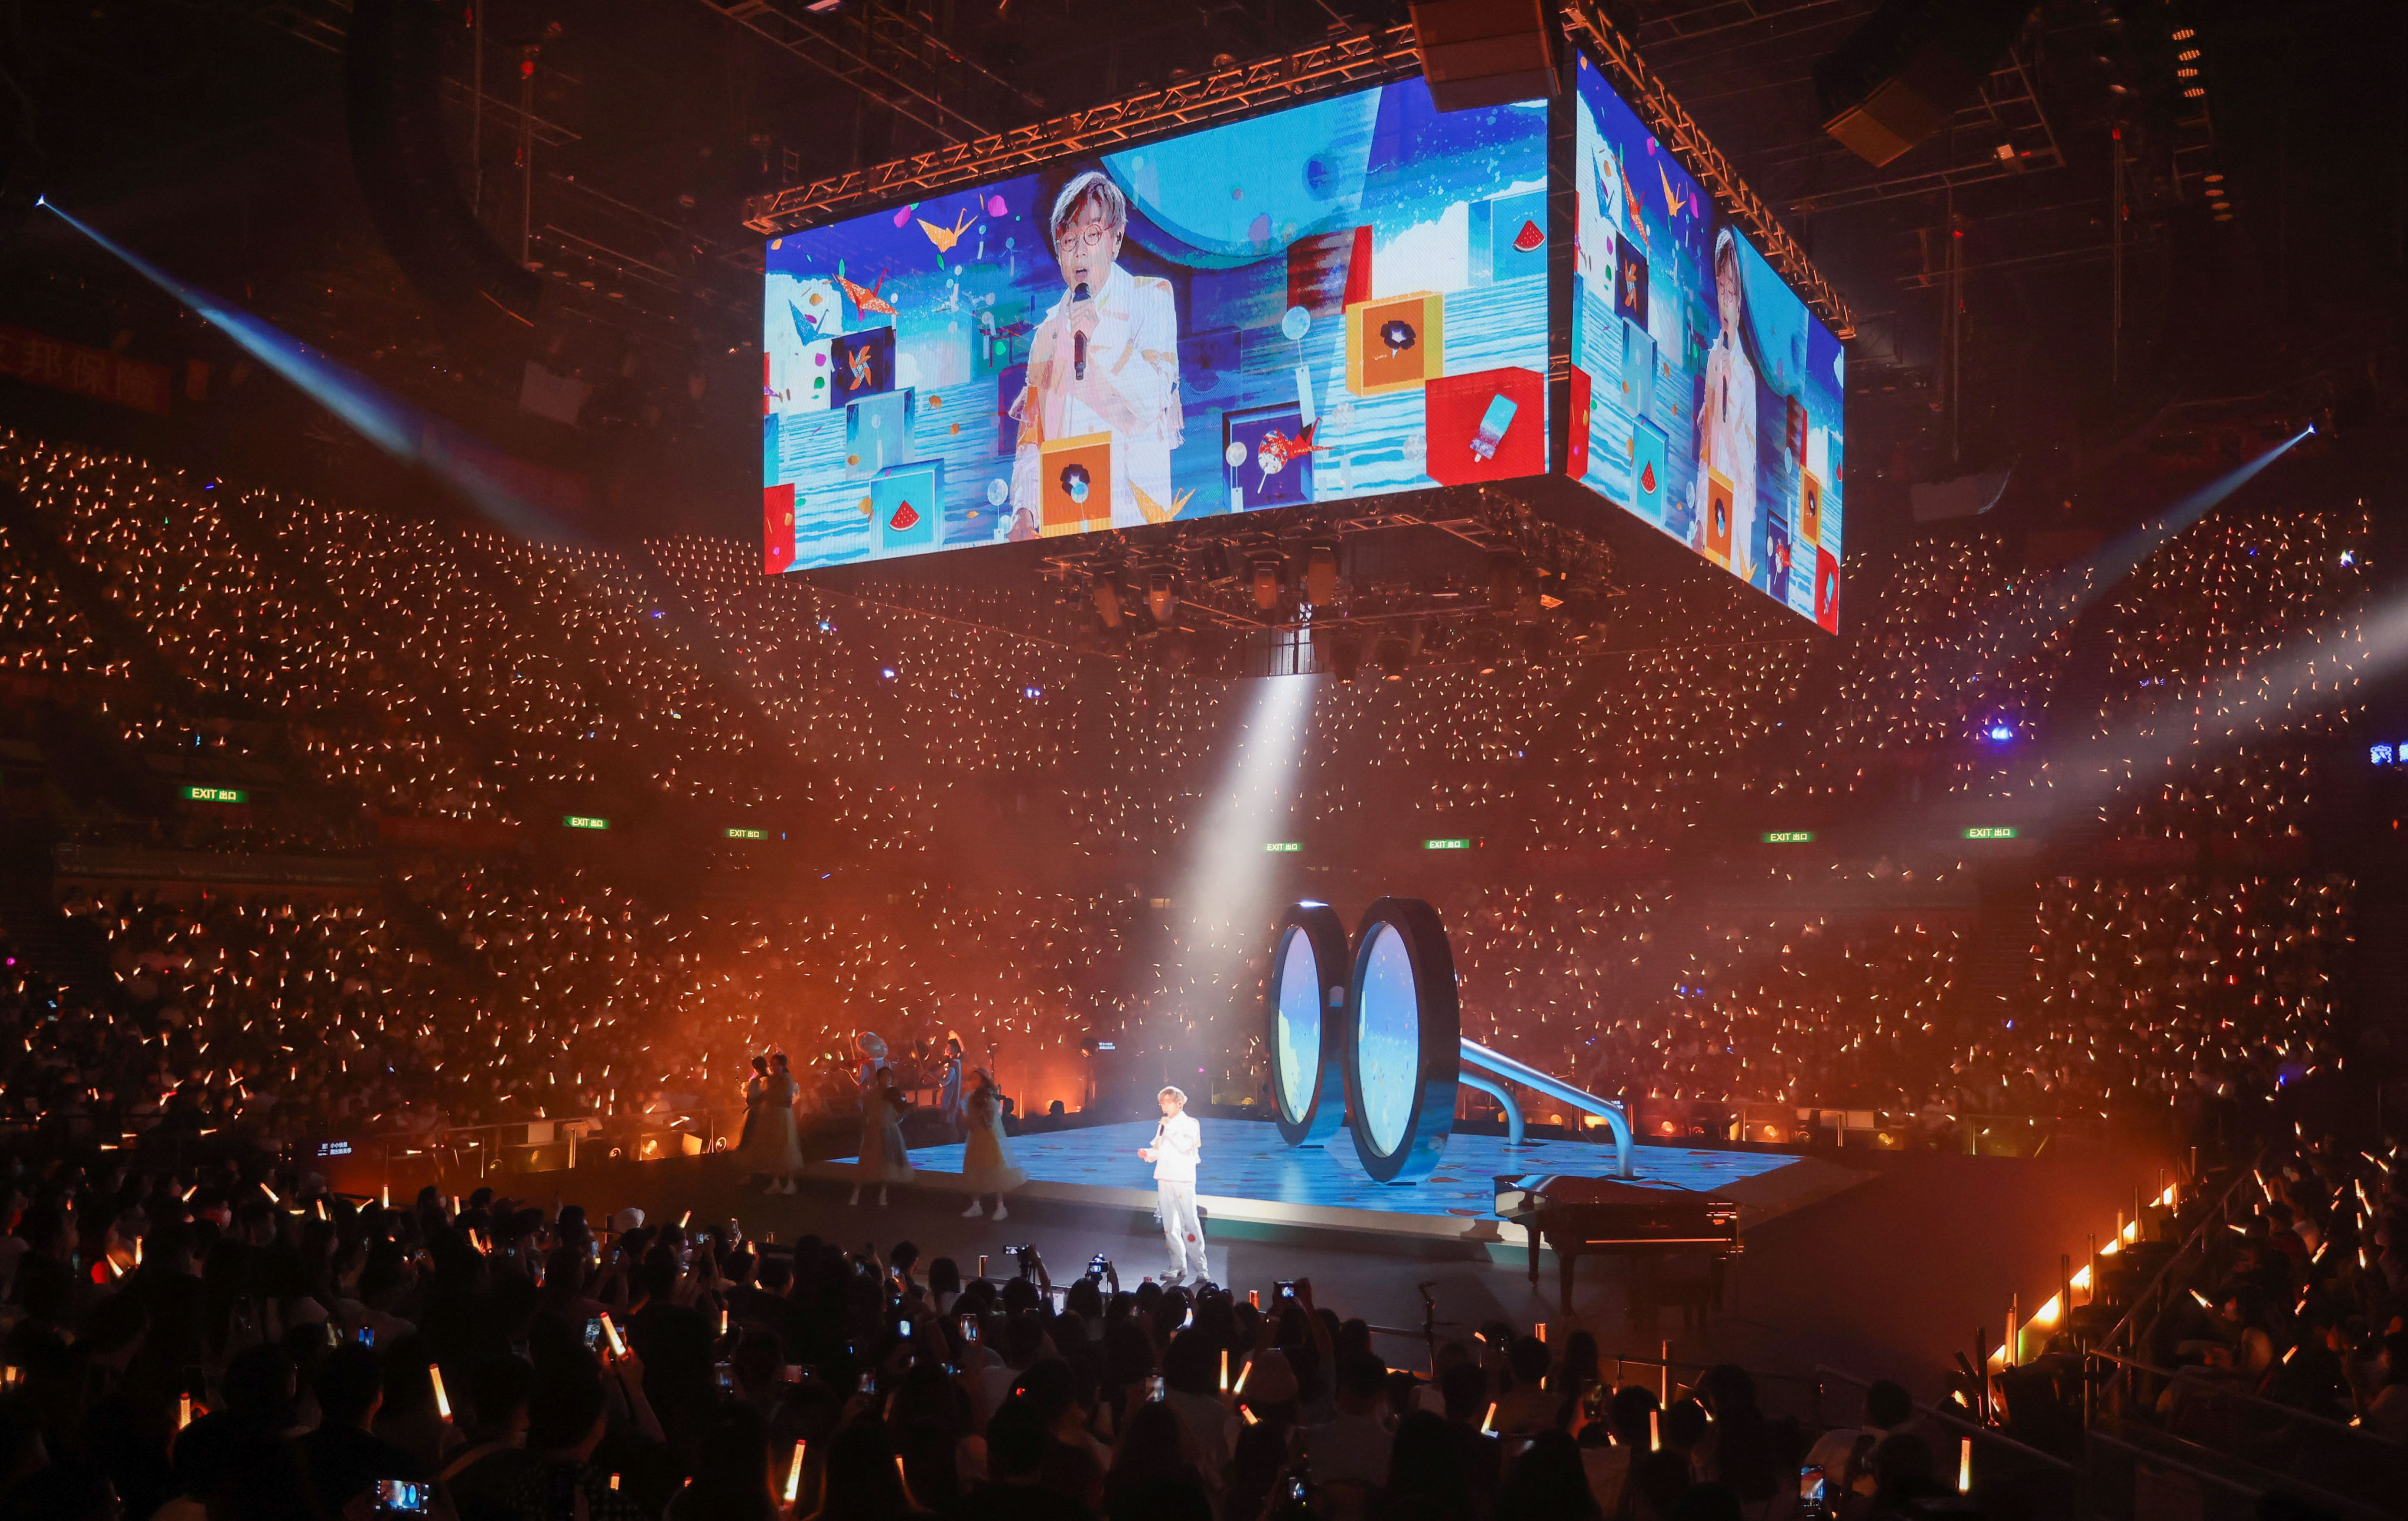 Terence Lam’s concert is the first show at the Hong Kong Coliseum since an accident during a performance by boy band Mirror last month. Photo: Jonathan Wong